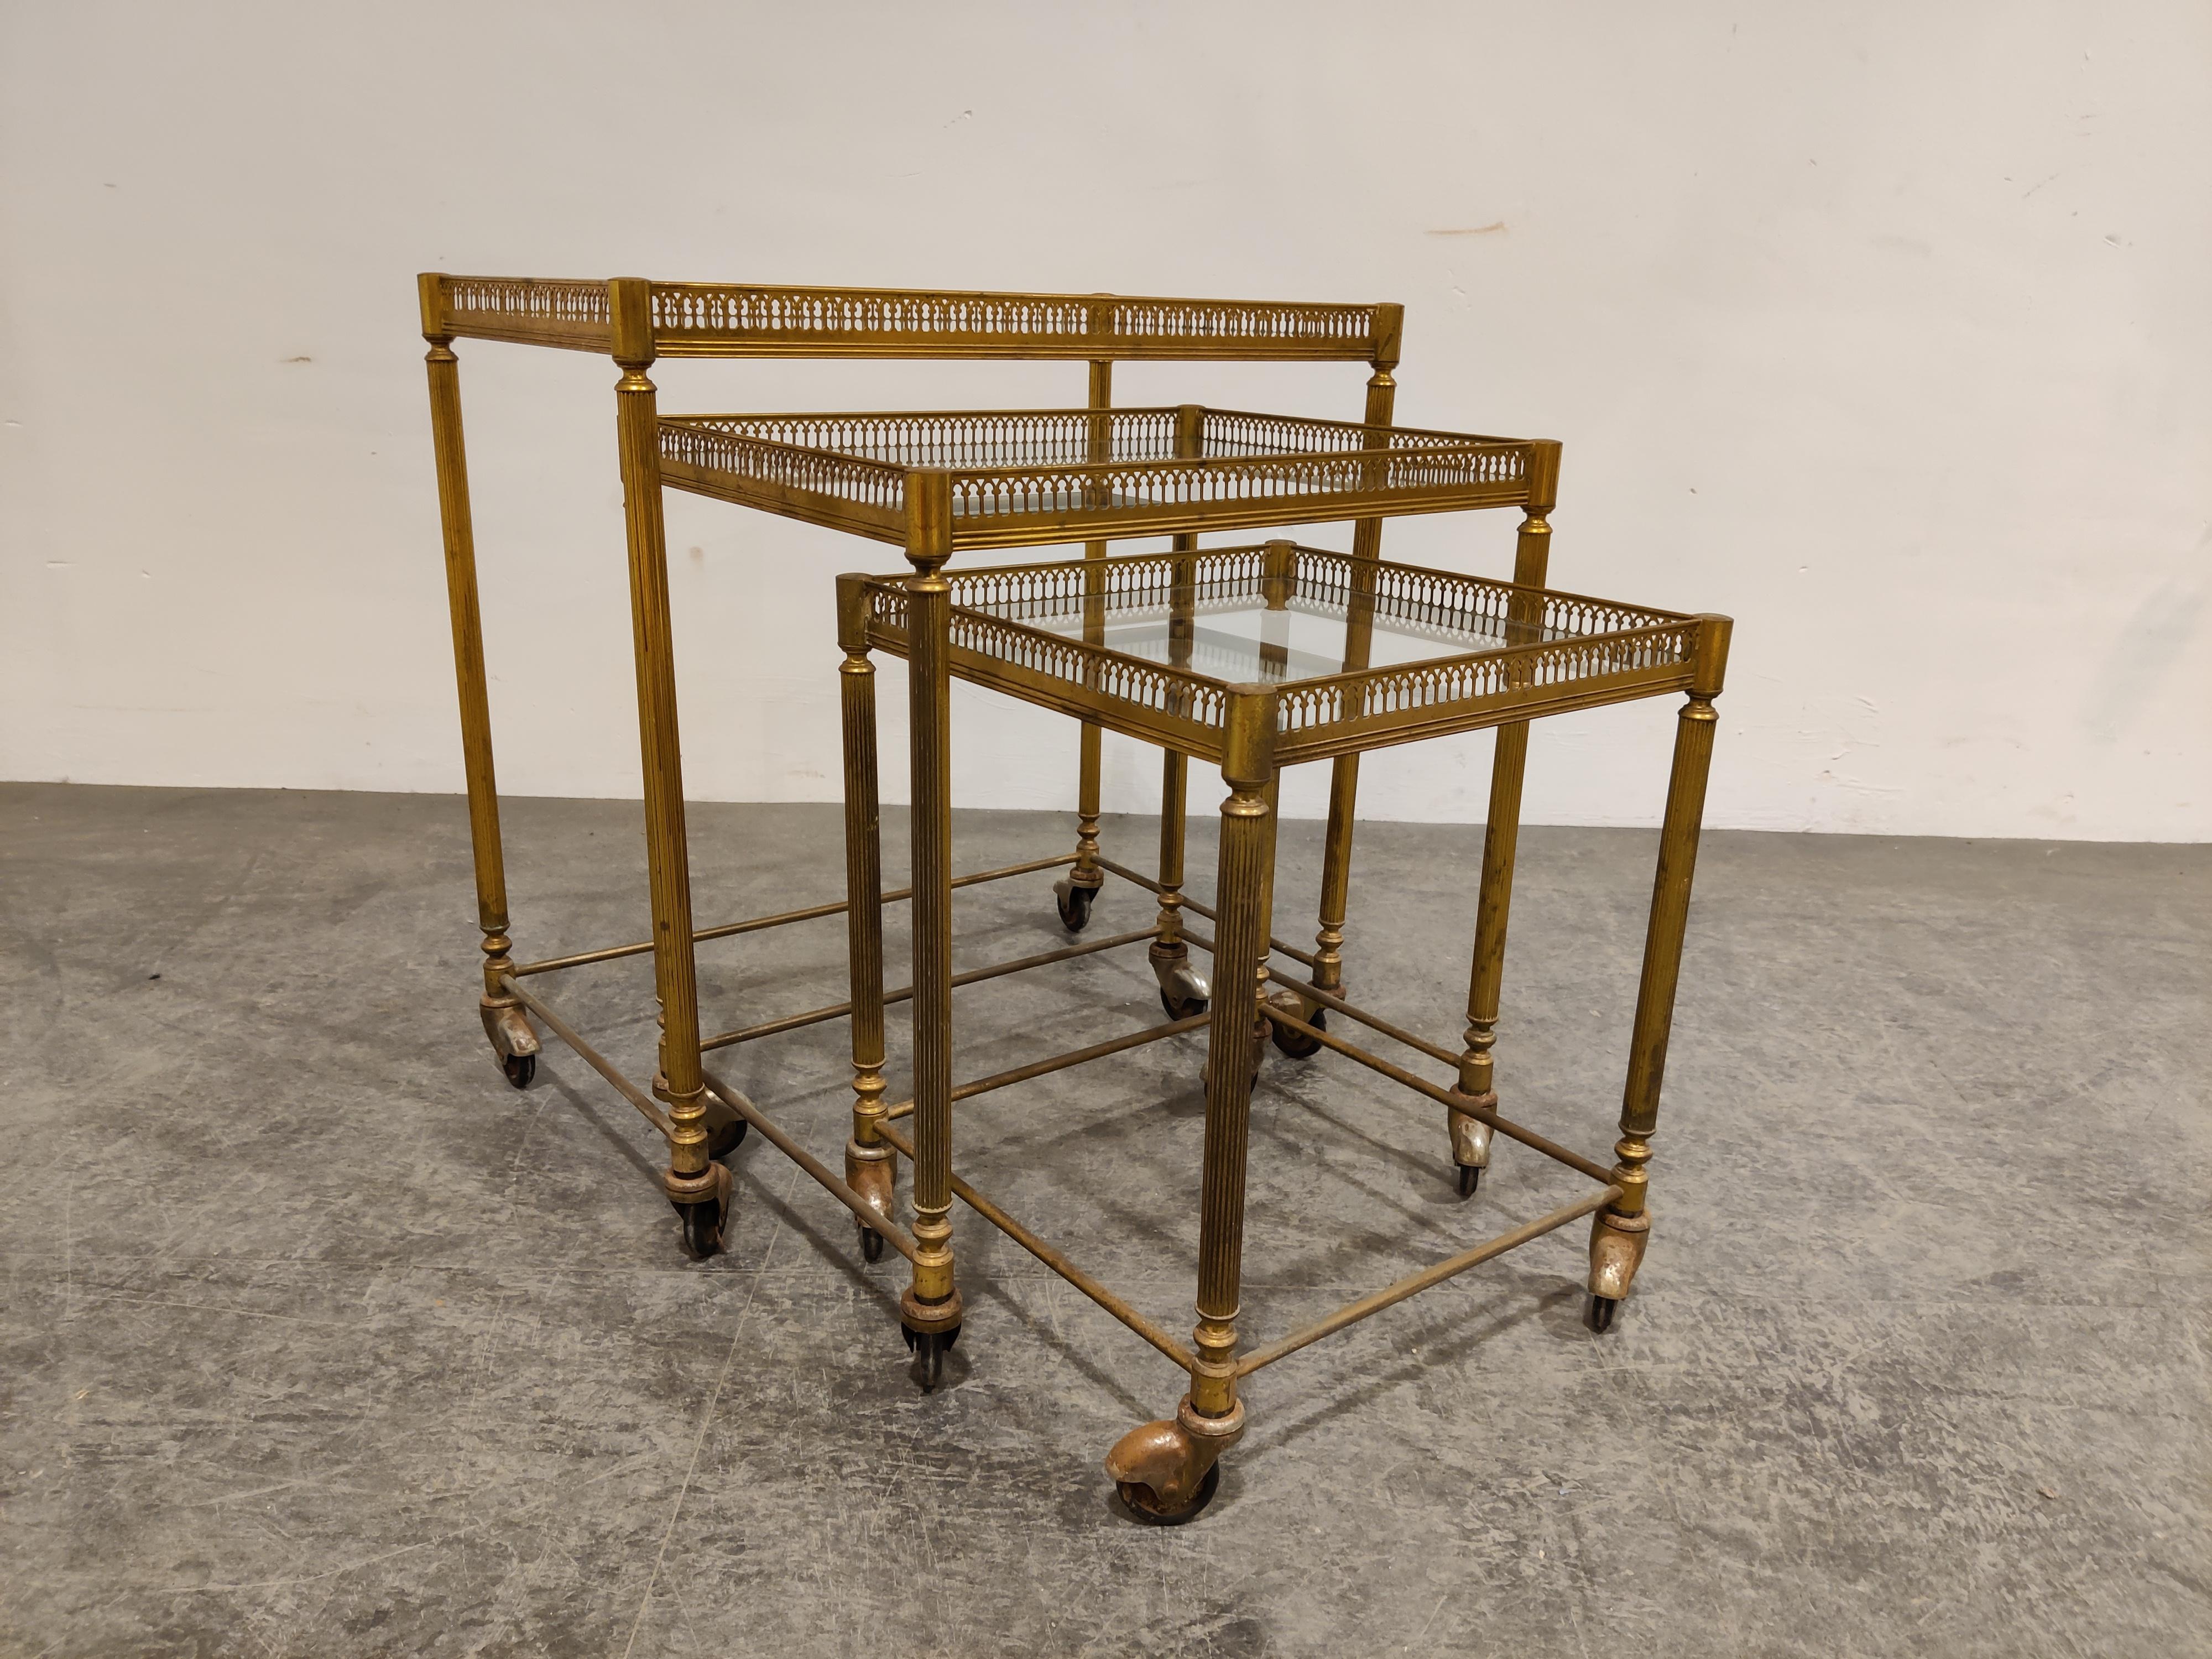 Very elegant set of patinated gilt metal neoclassical nesting tables on wheels in the style of maison Baguès.

The tables still have their original glass.

Wear and patina consisten with age.

1960s - France

Dimensions of the largest